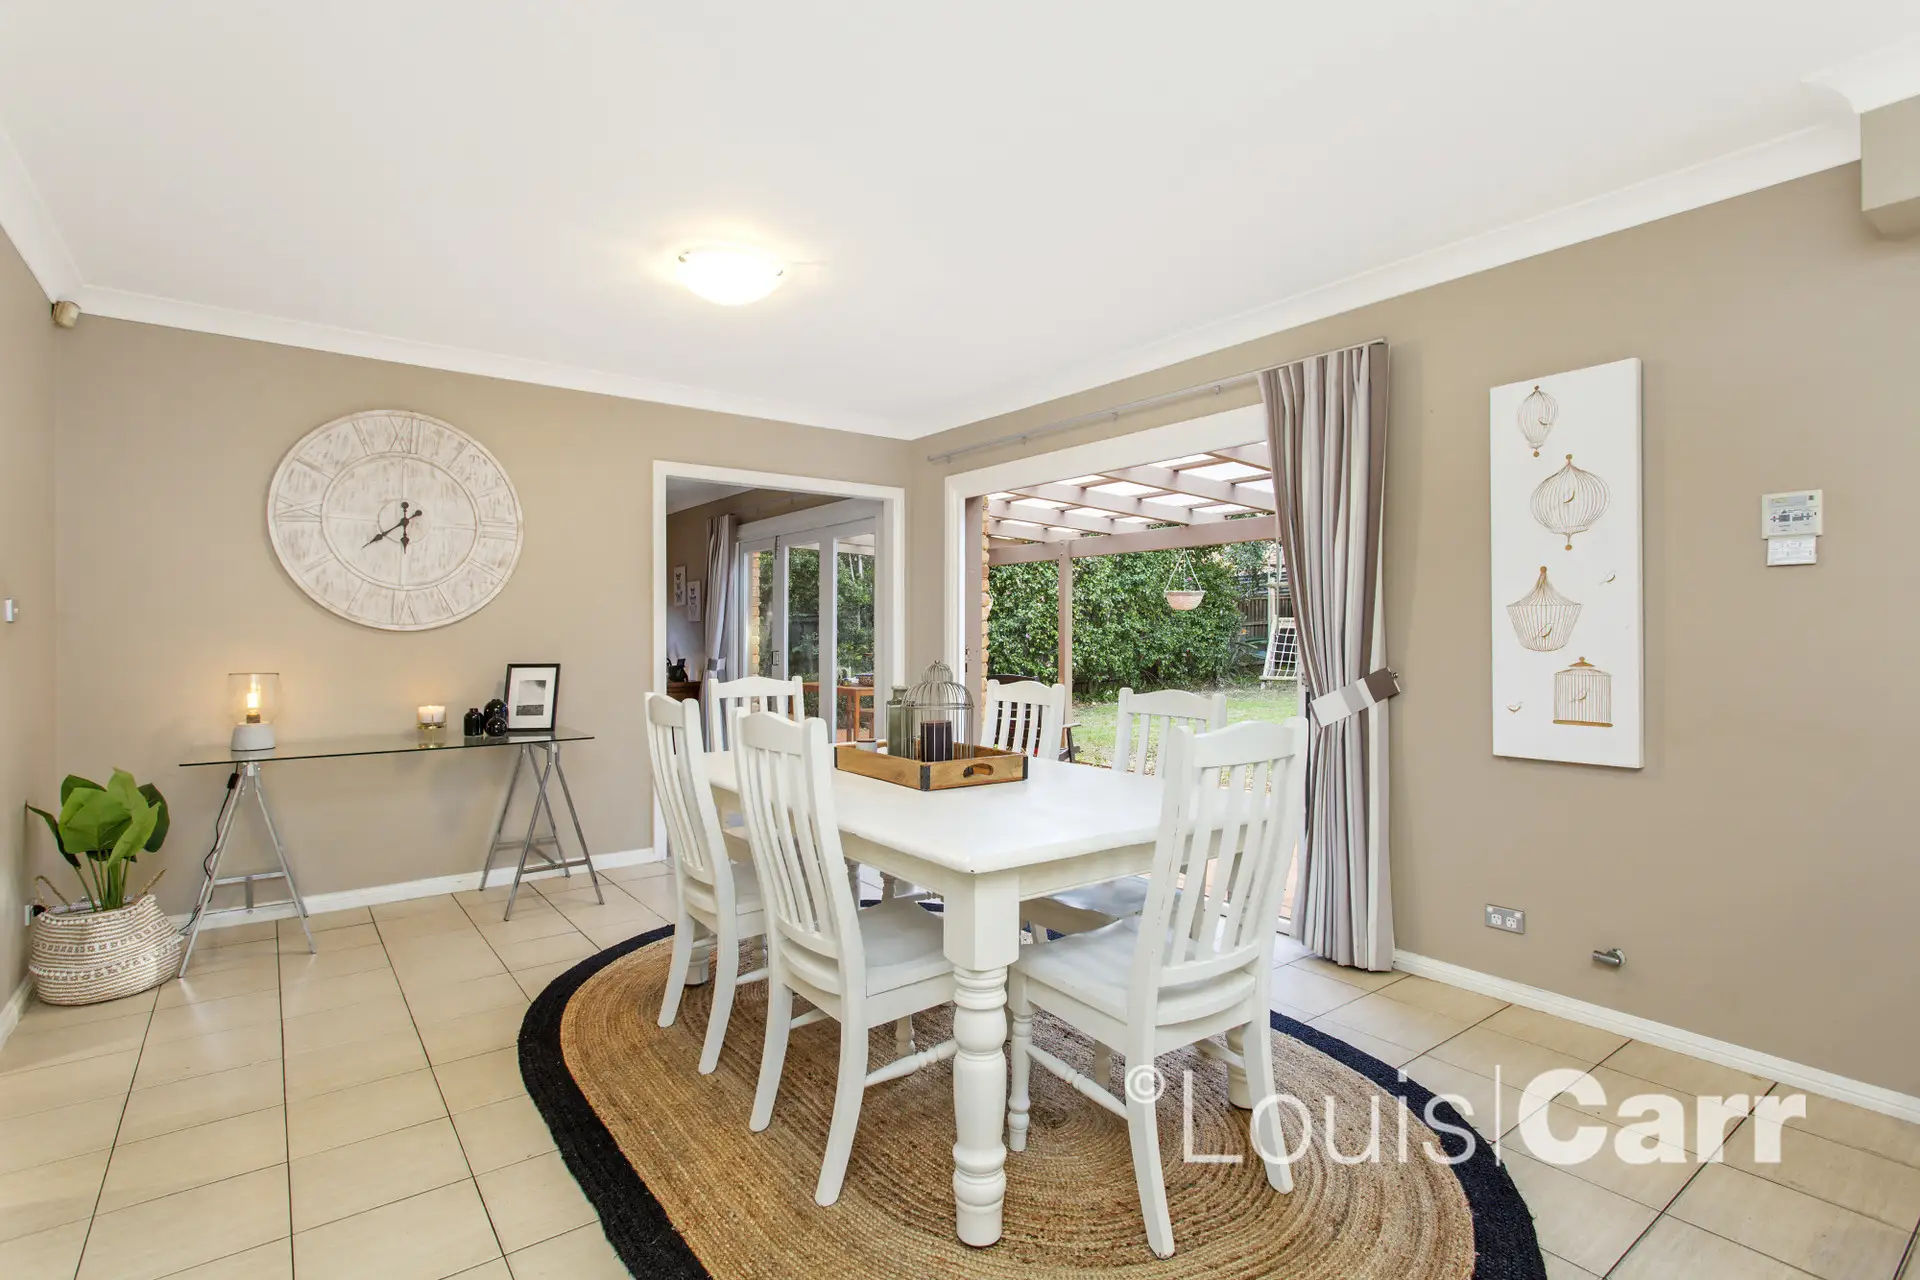 Photo #5: 13 Sanctuary Point Road, West Pennant Hills - Sold by Louis Carr Real Estate